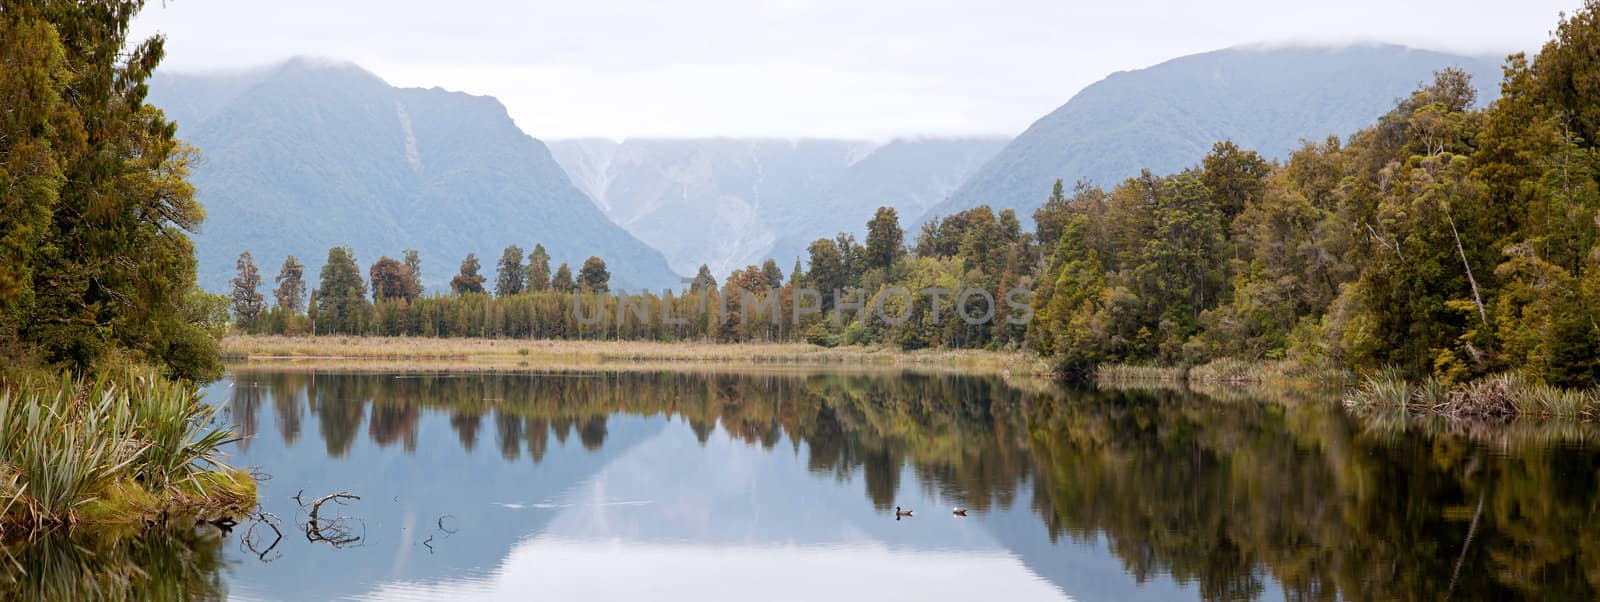 Lake Matheson with cloudy sky New Zealand by vichie81